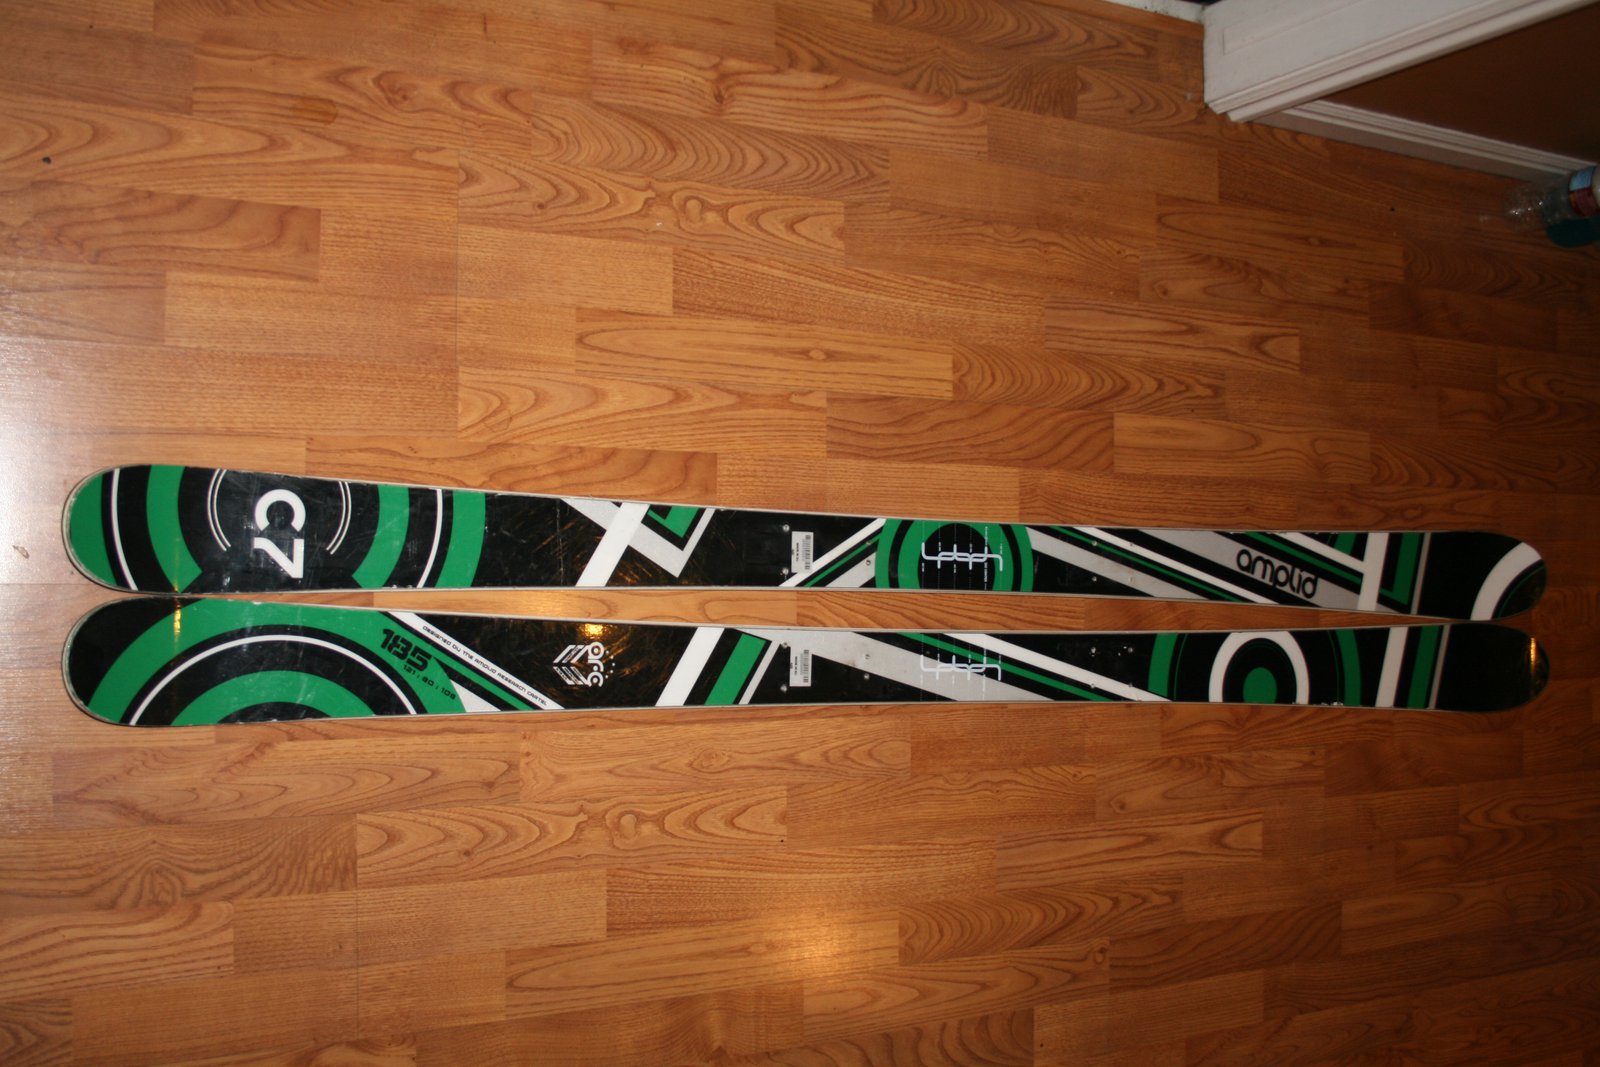 Amplid skis FOR SALE